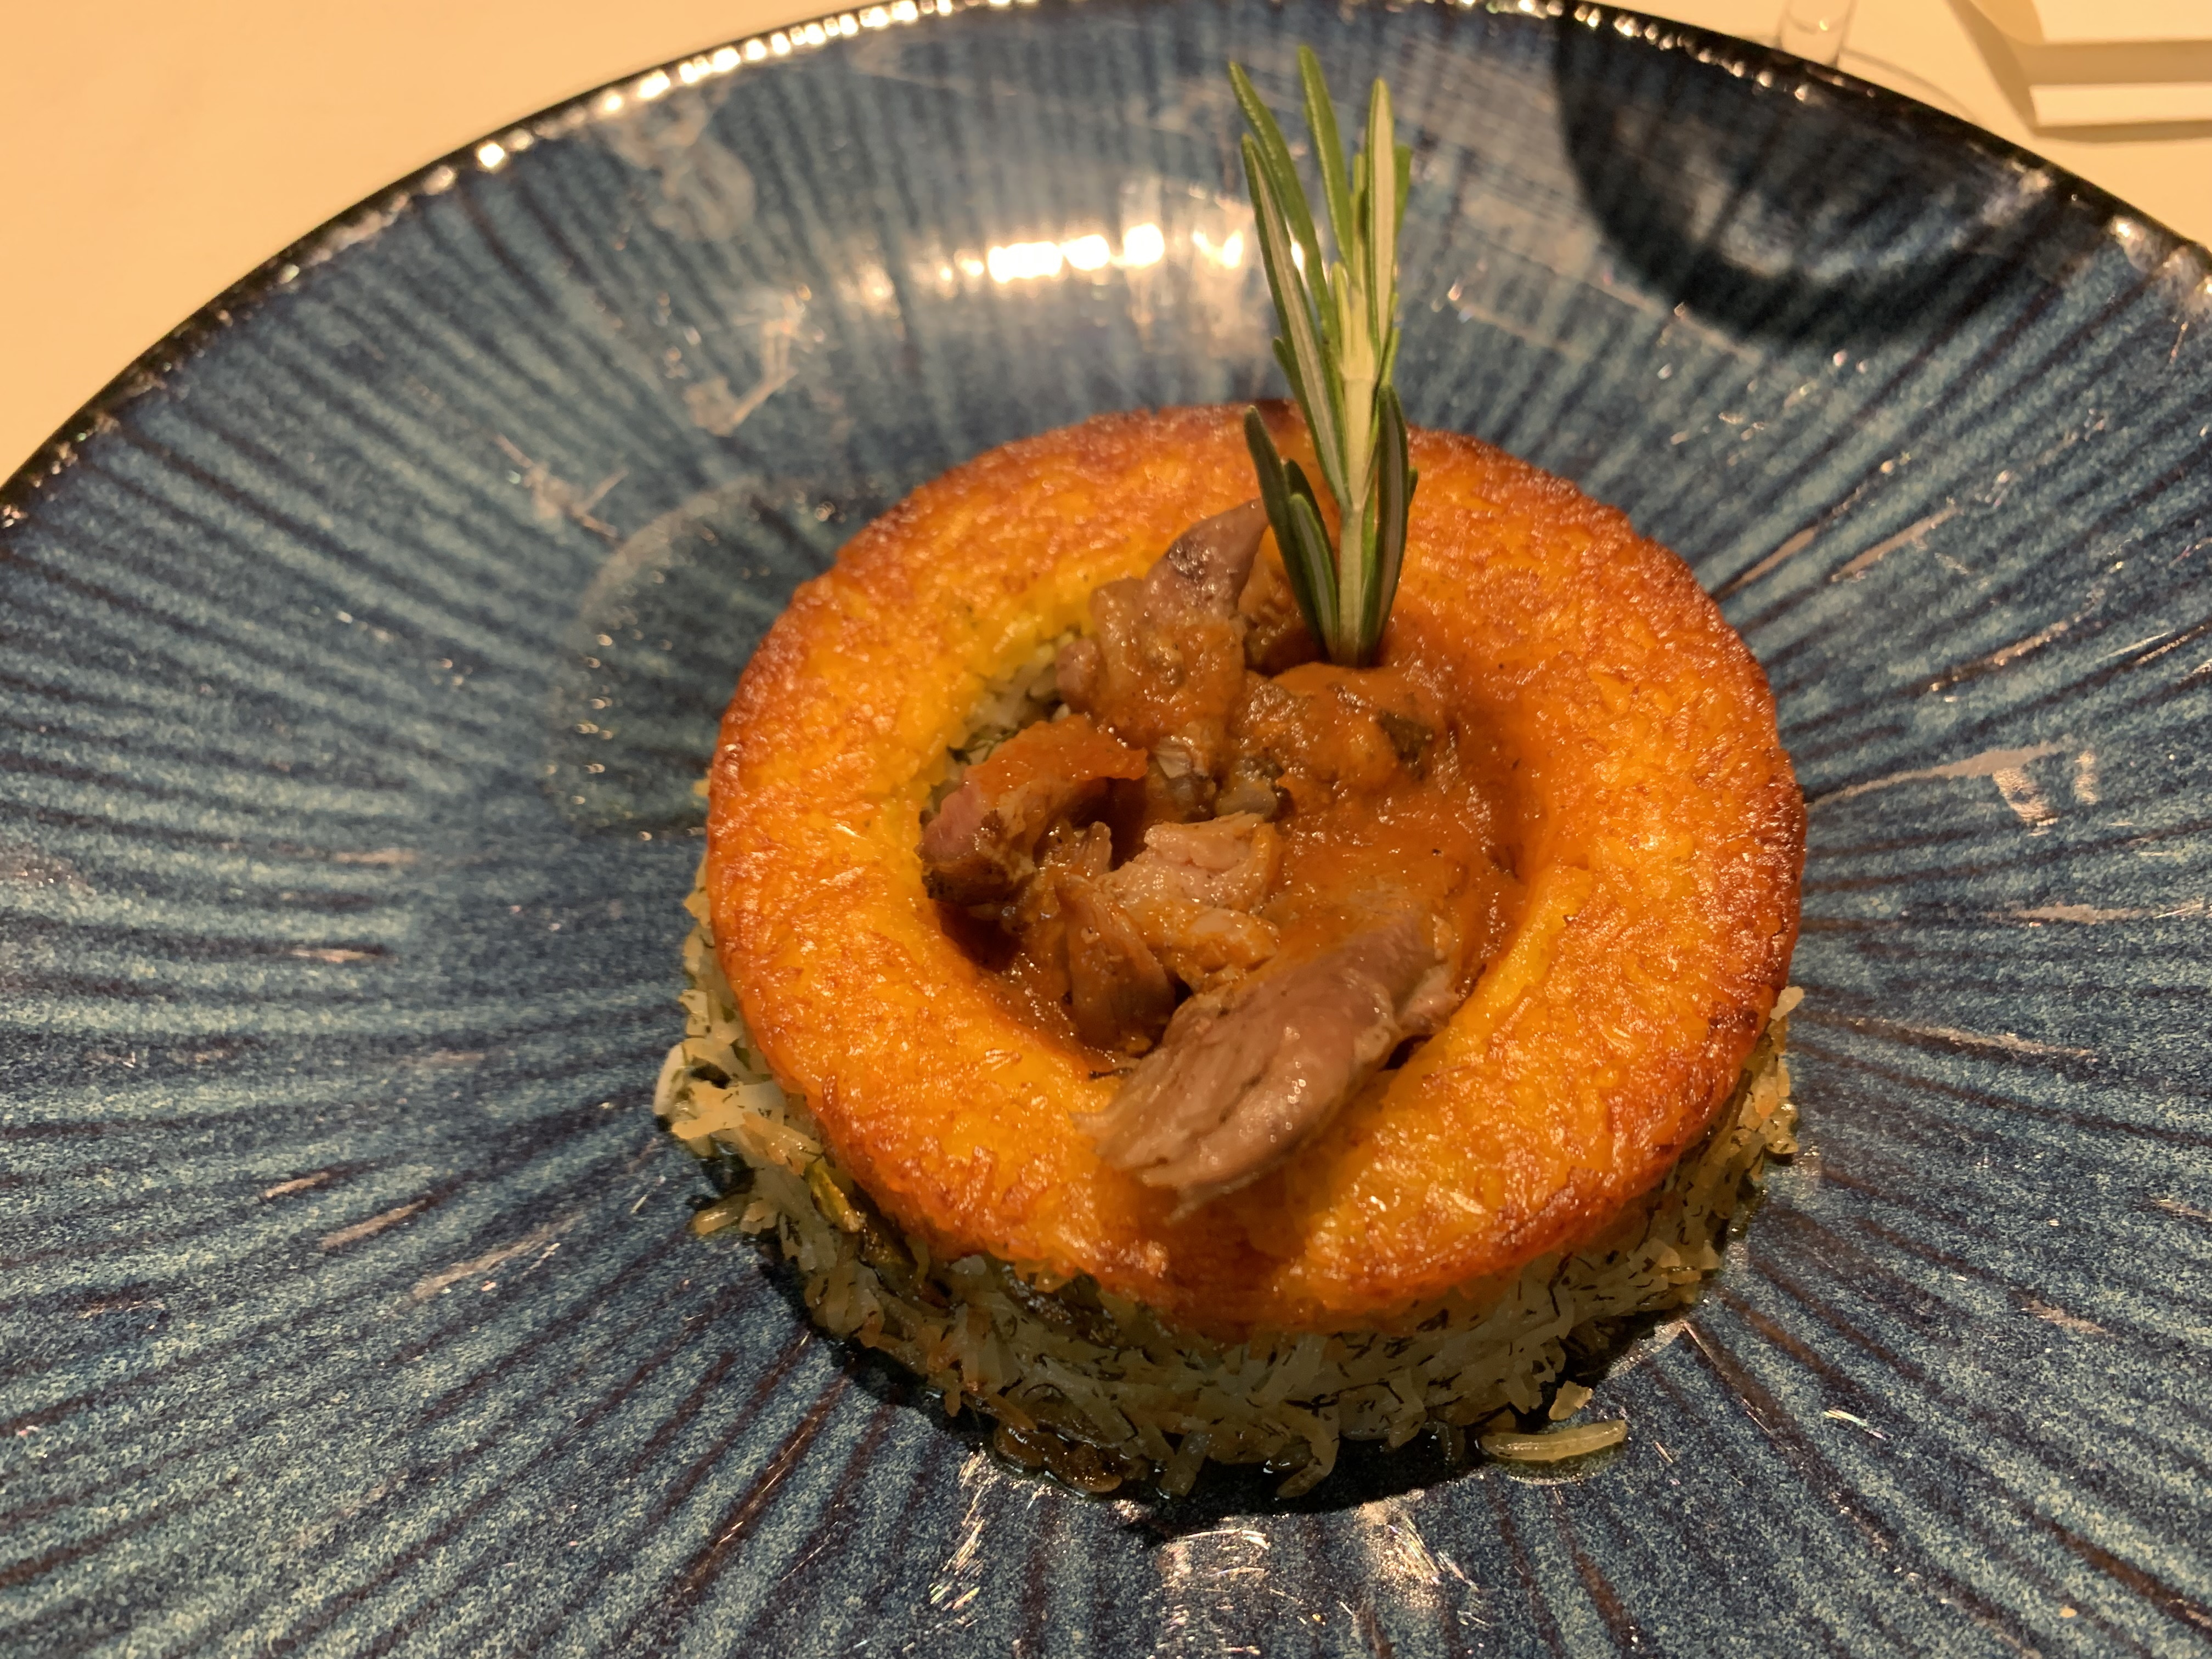 Rice plated in a donut shape, with a sprig of rosemary sticking out. In the middle of the donut is lamb with an orange sauce. The top ring of rice has been cooked to a golden-brown crust.